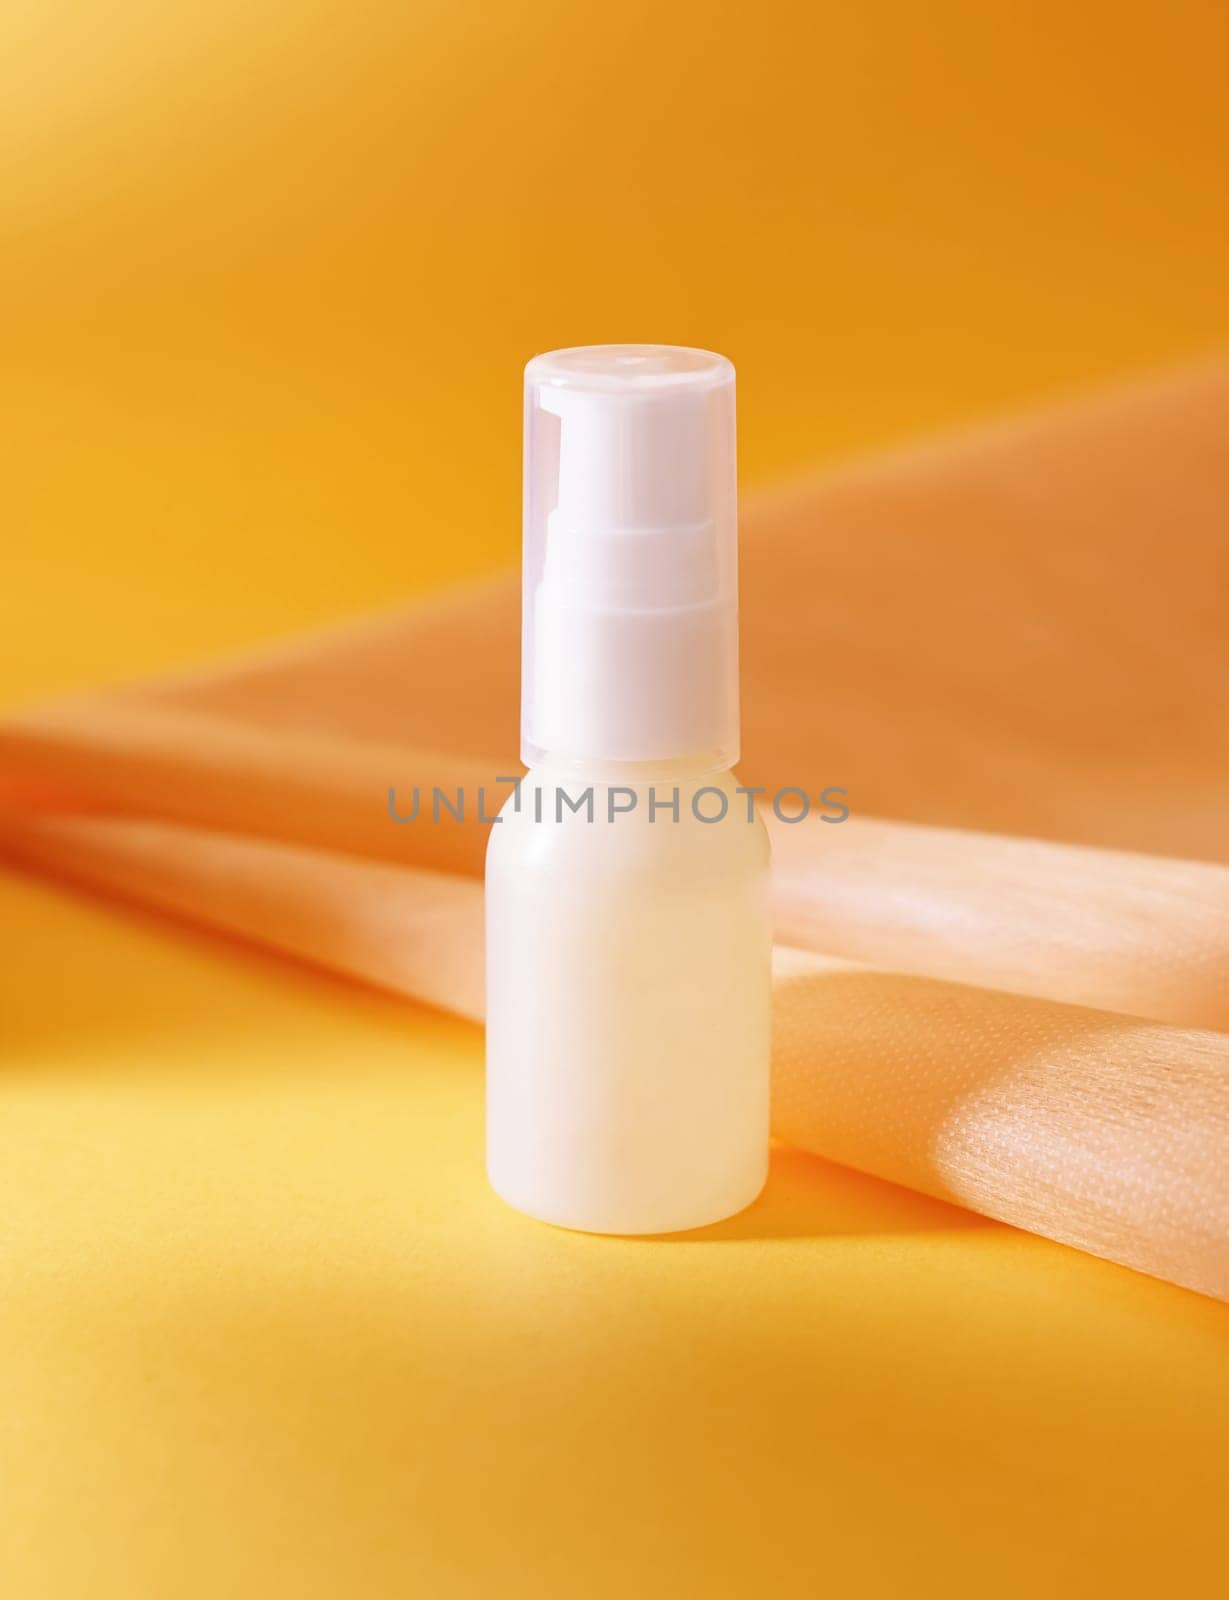 Unlabeled bottle of cosmetic or soap shower gel is displayed on an artistic background, product enclosure for liquid product for promotional and marketing purpose